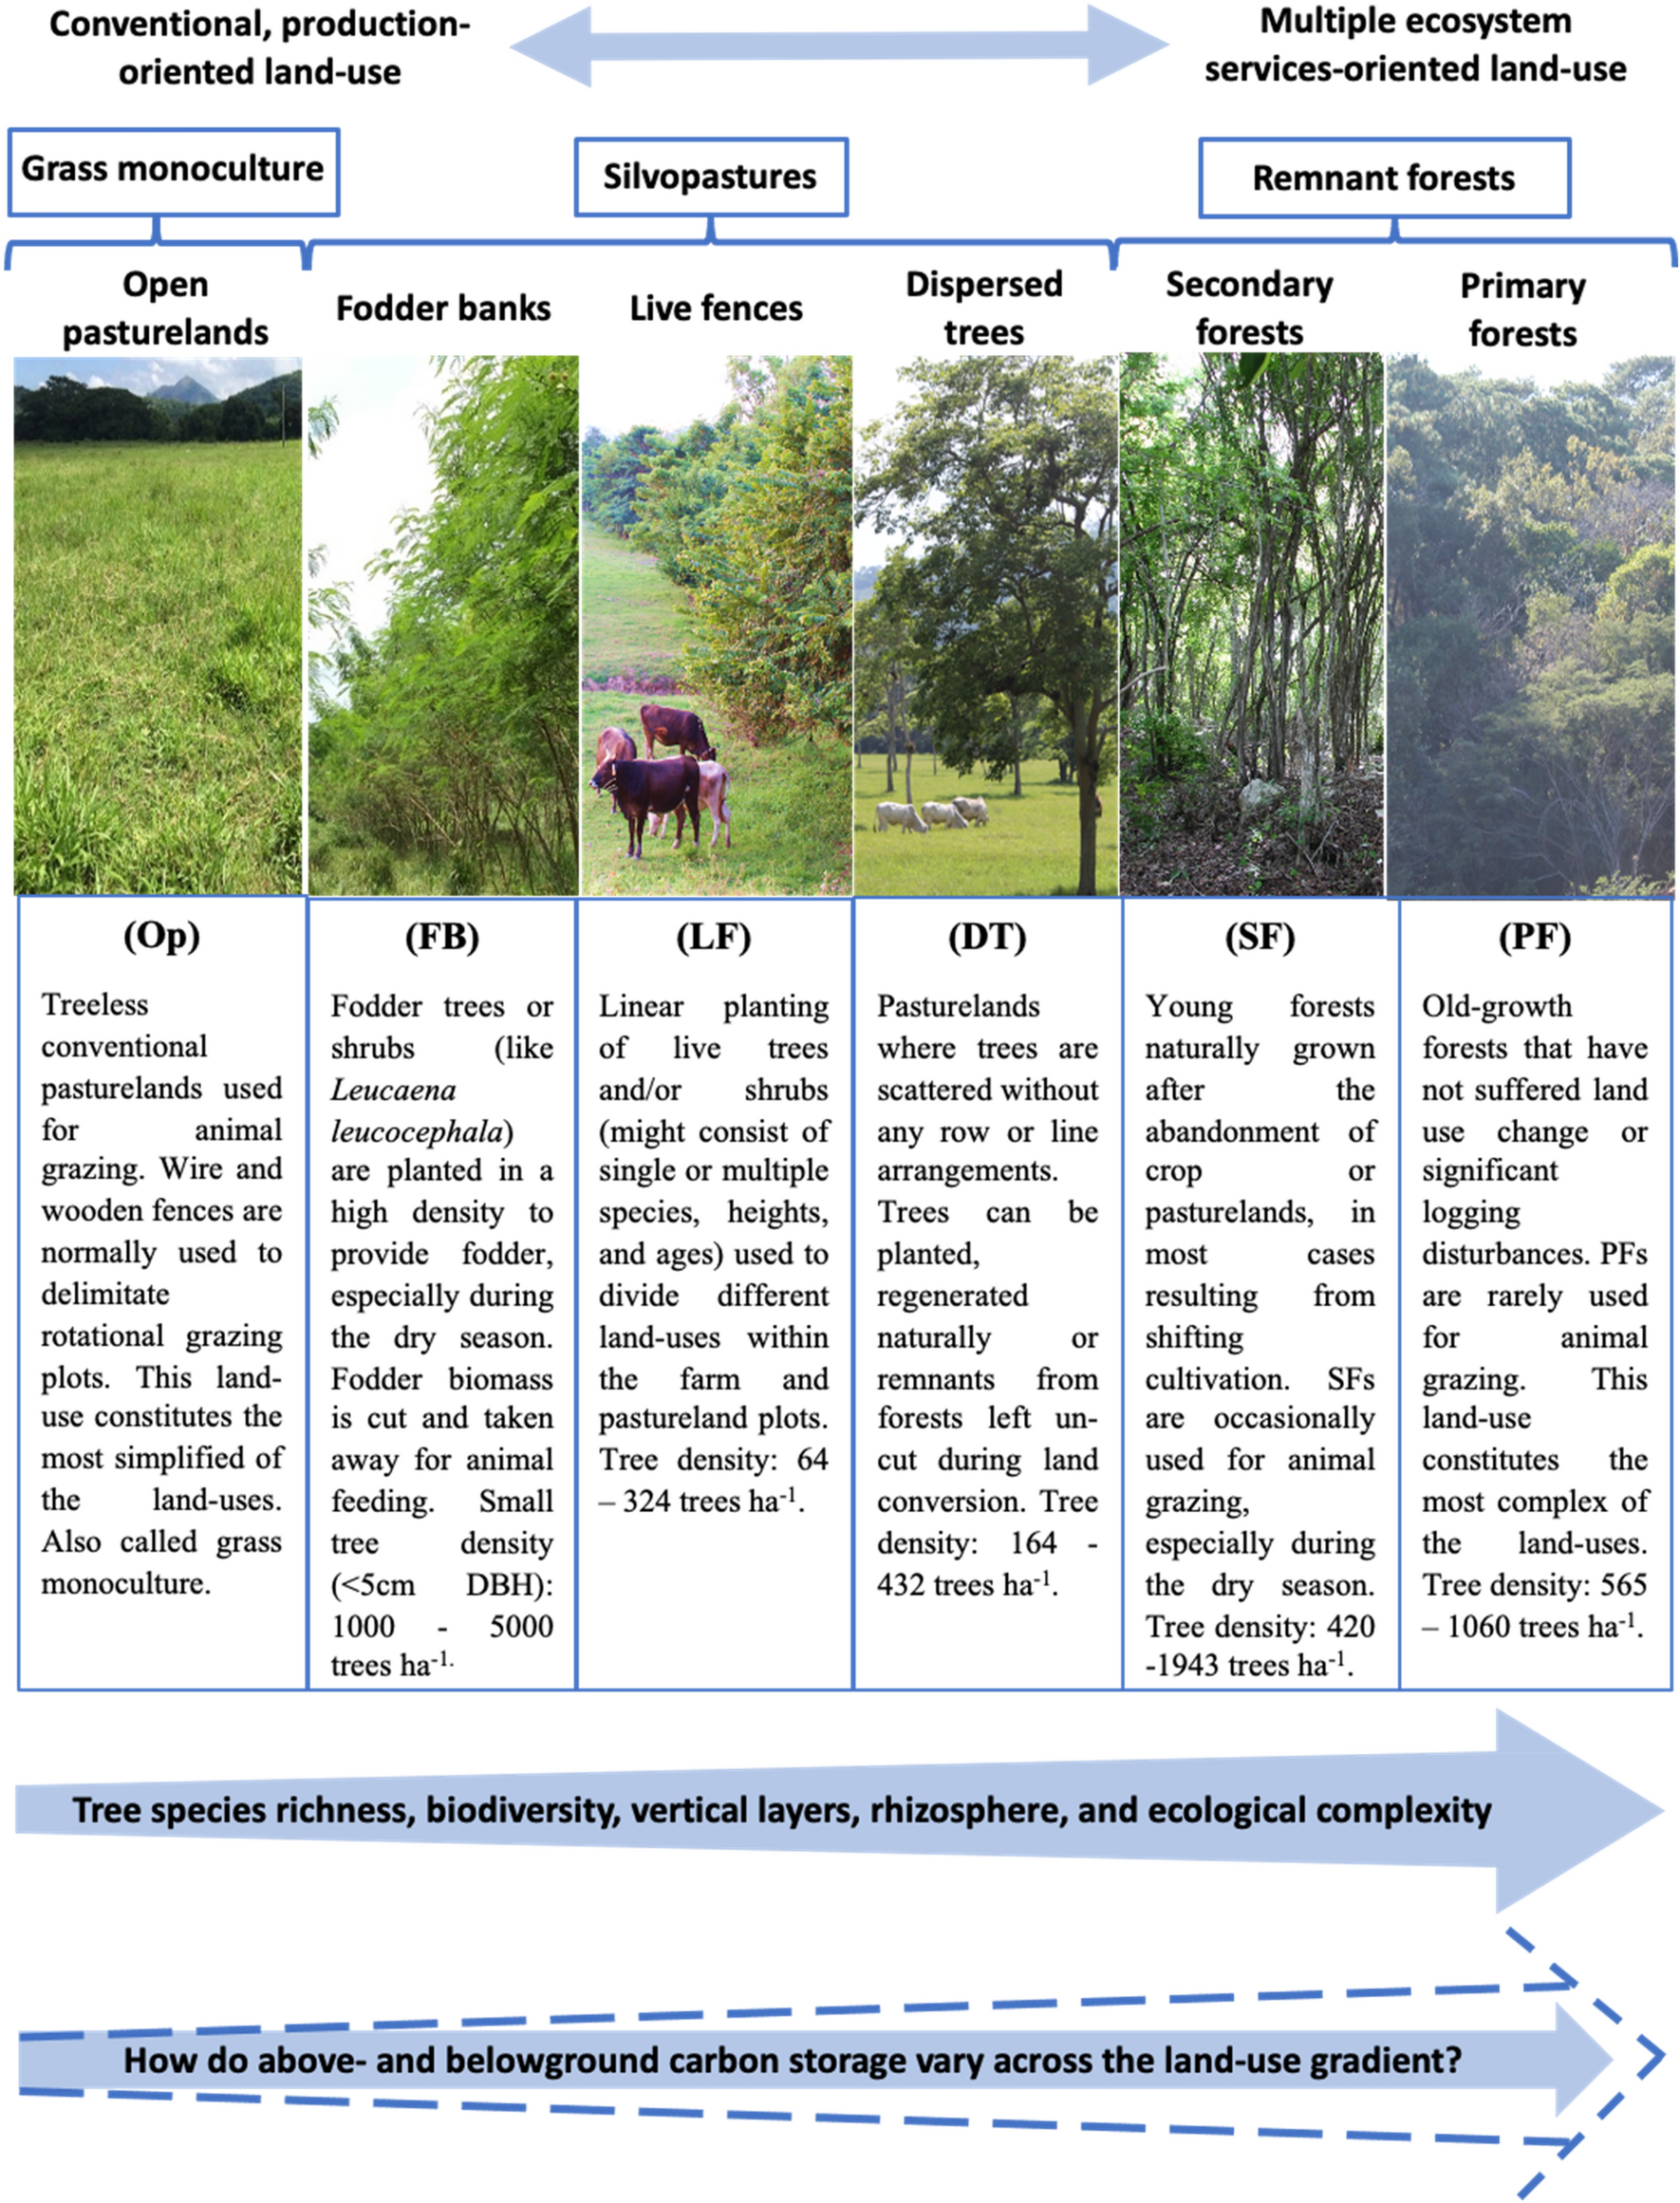 Silvopastoral systems and remnant forests enhance carbon storage in  livestock-dominated landscapes in Mexico | Scientific Reports